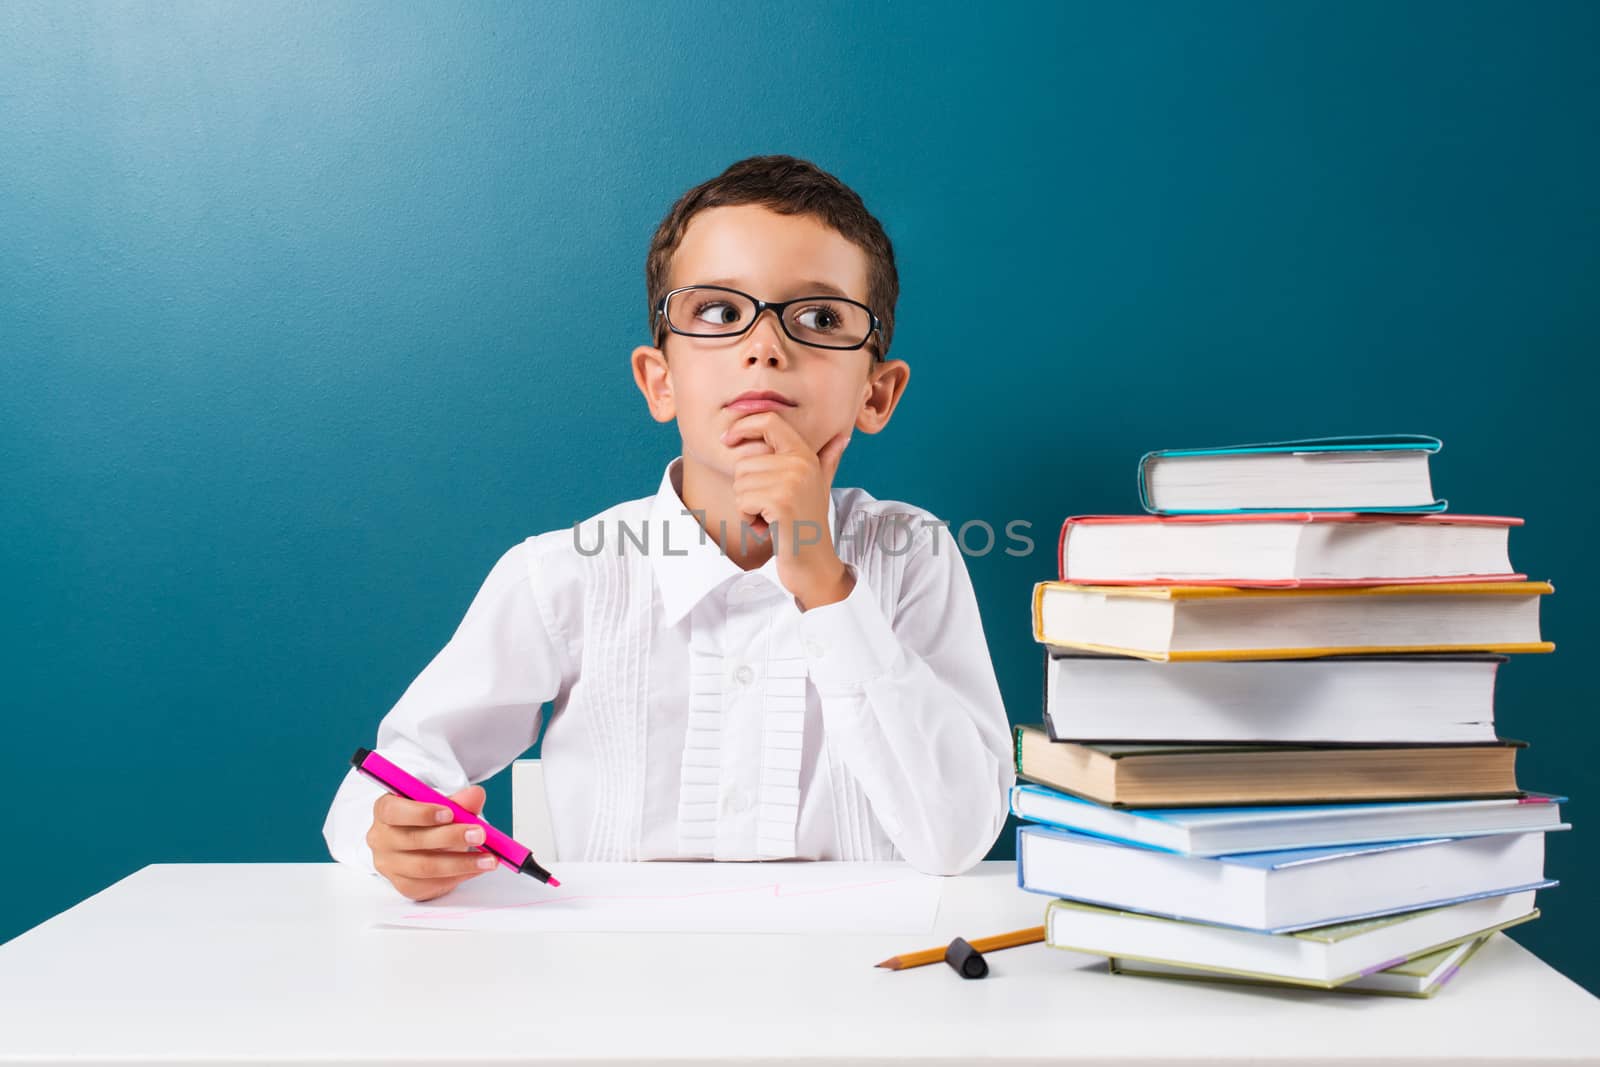 Cute little boy with books on the table, blue background